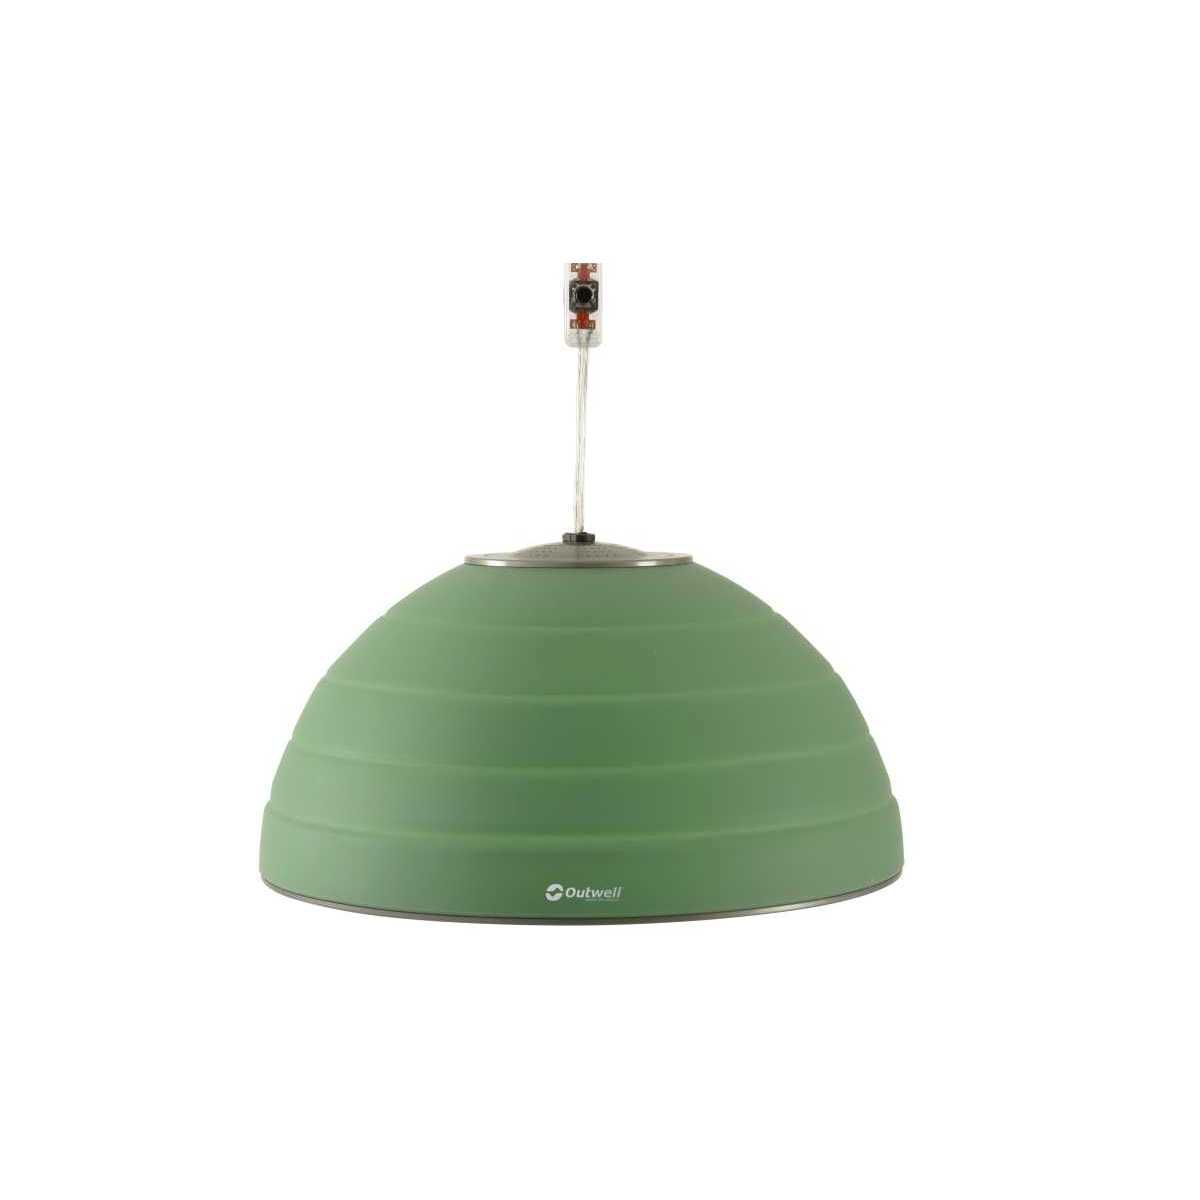 Outwell Pollux Lux LED-Haengeleuchte 230V 500lm Shadow Green - 651244